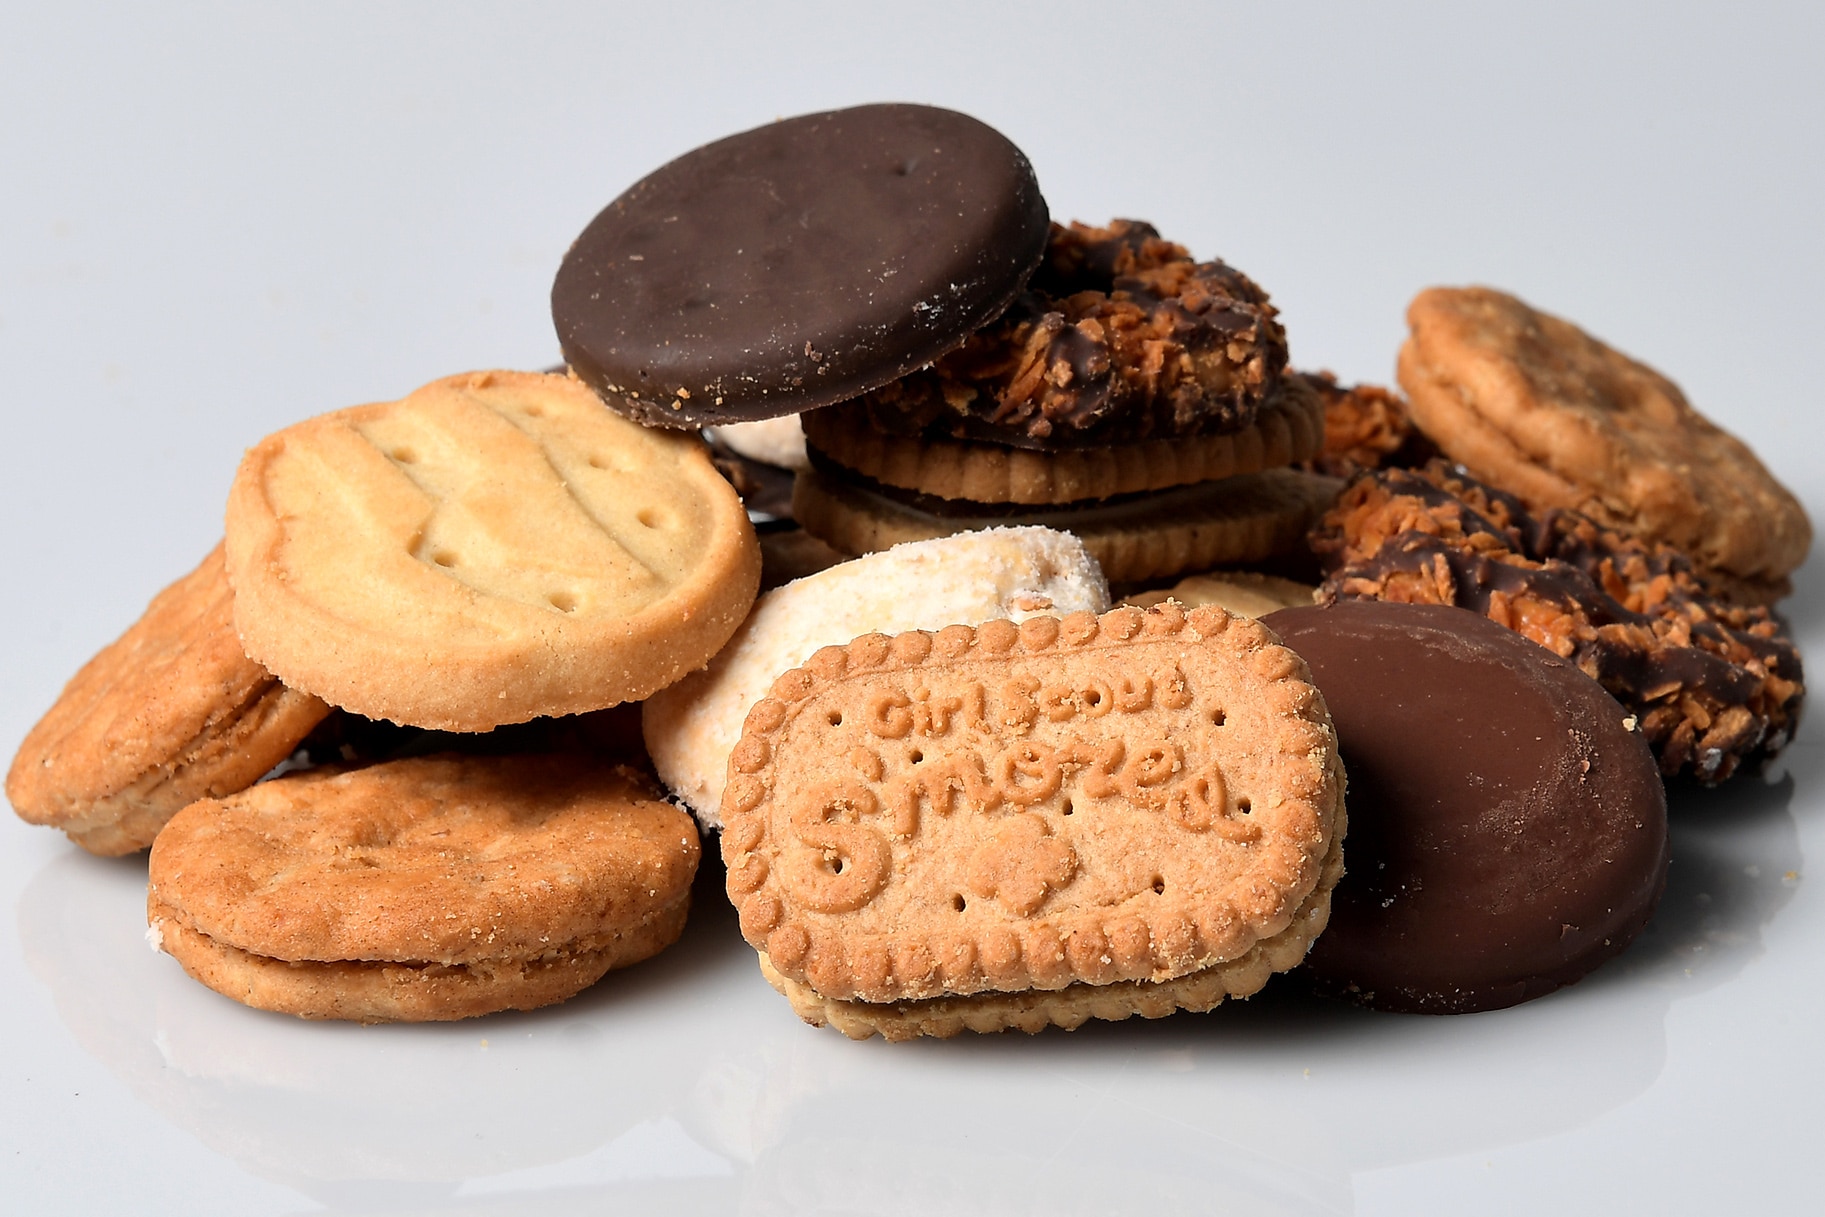 Buy Girl Scout Cookies See New Caramel Chocolate Chip Flavor The